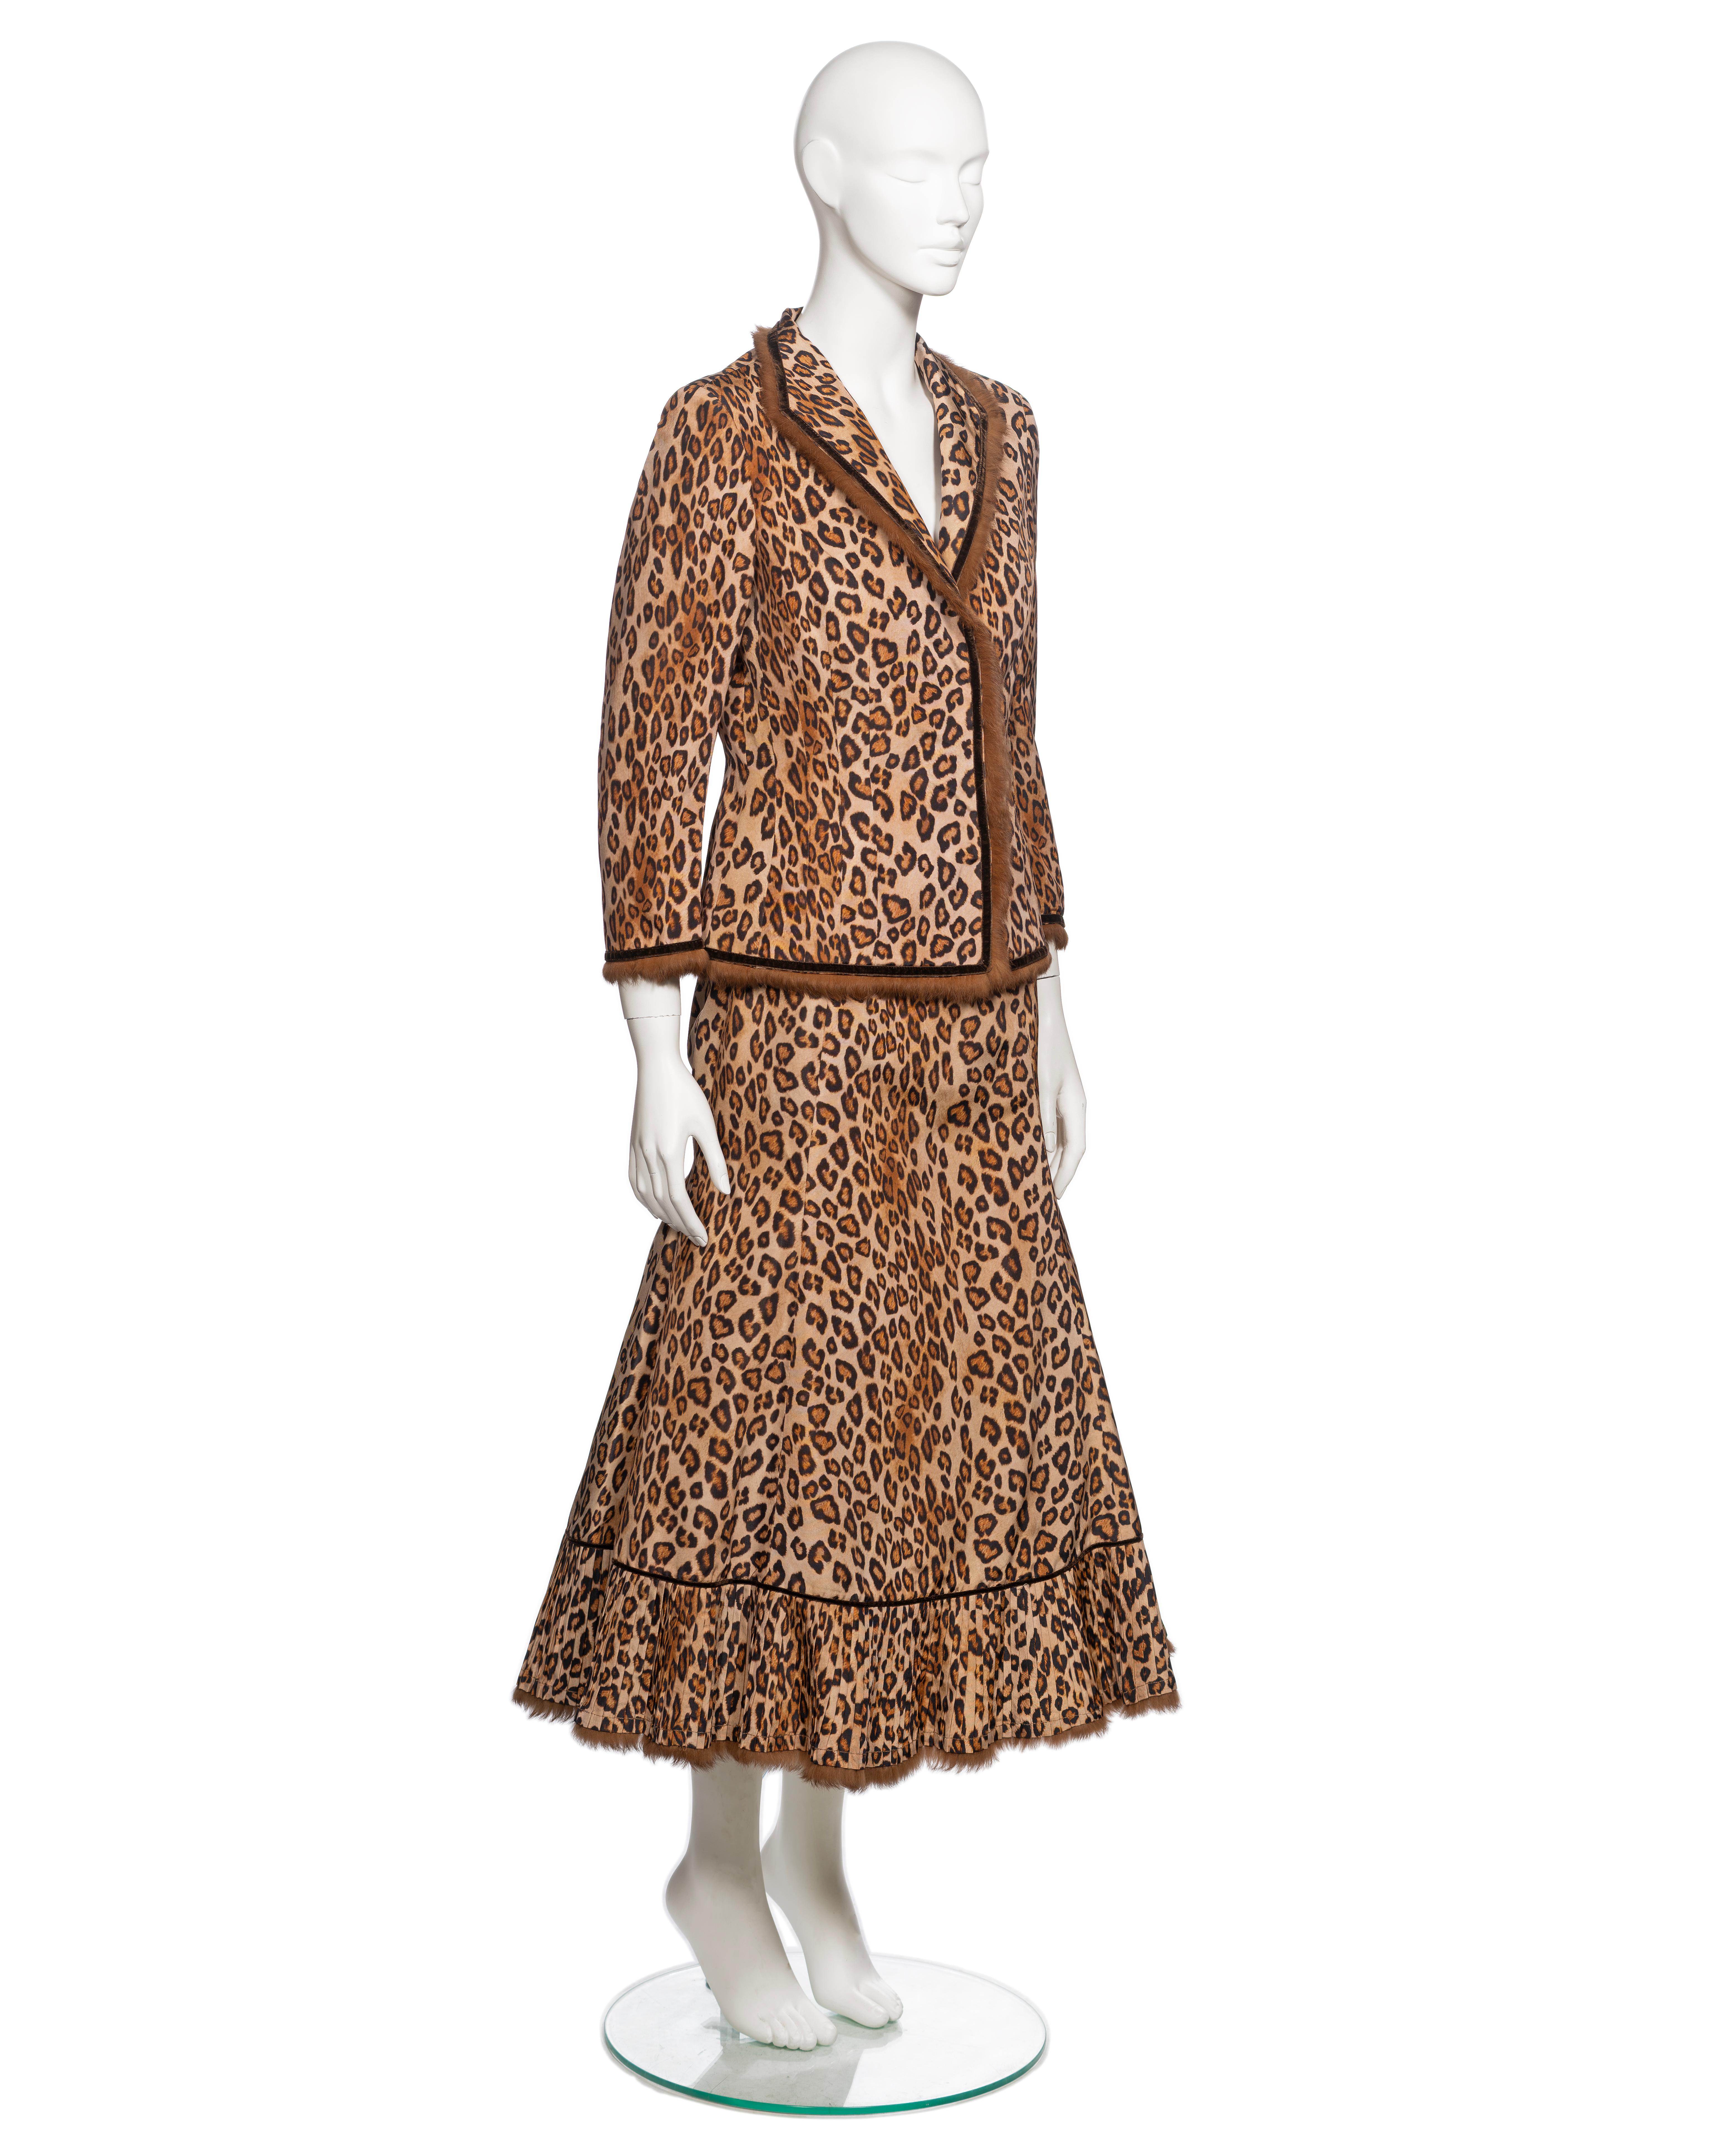 Alexander McQueen Leopard Print Silk and Fur Jacket and Skirt Suit, FW 2005 For Sale 1